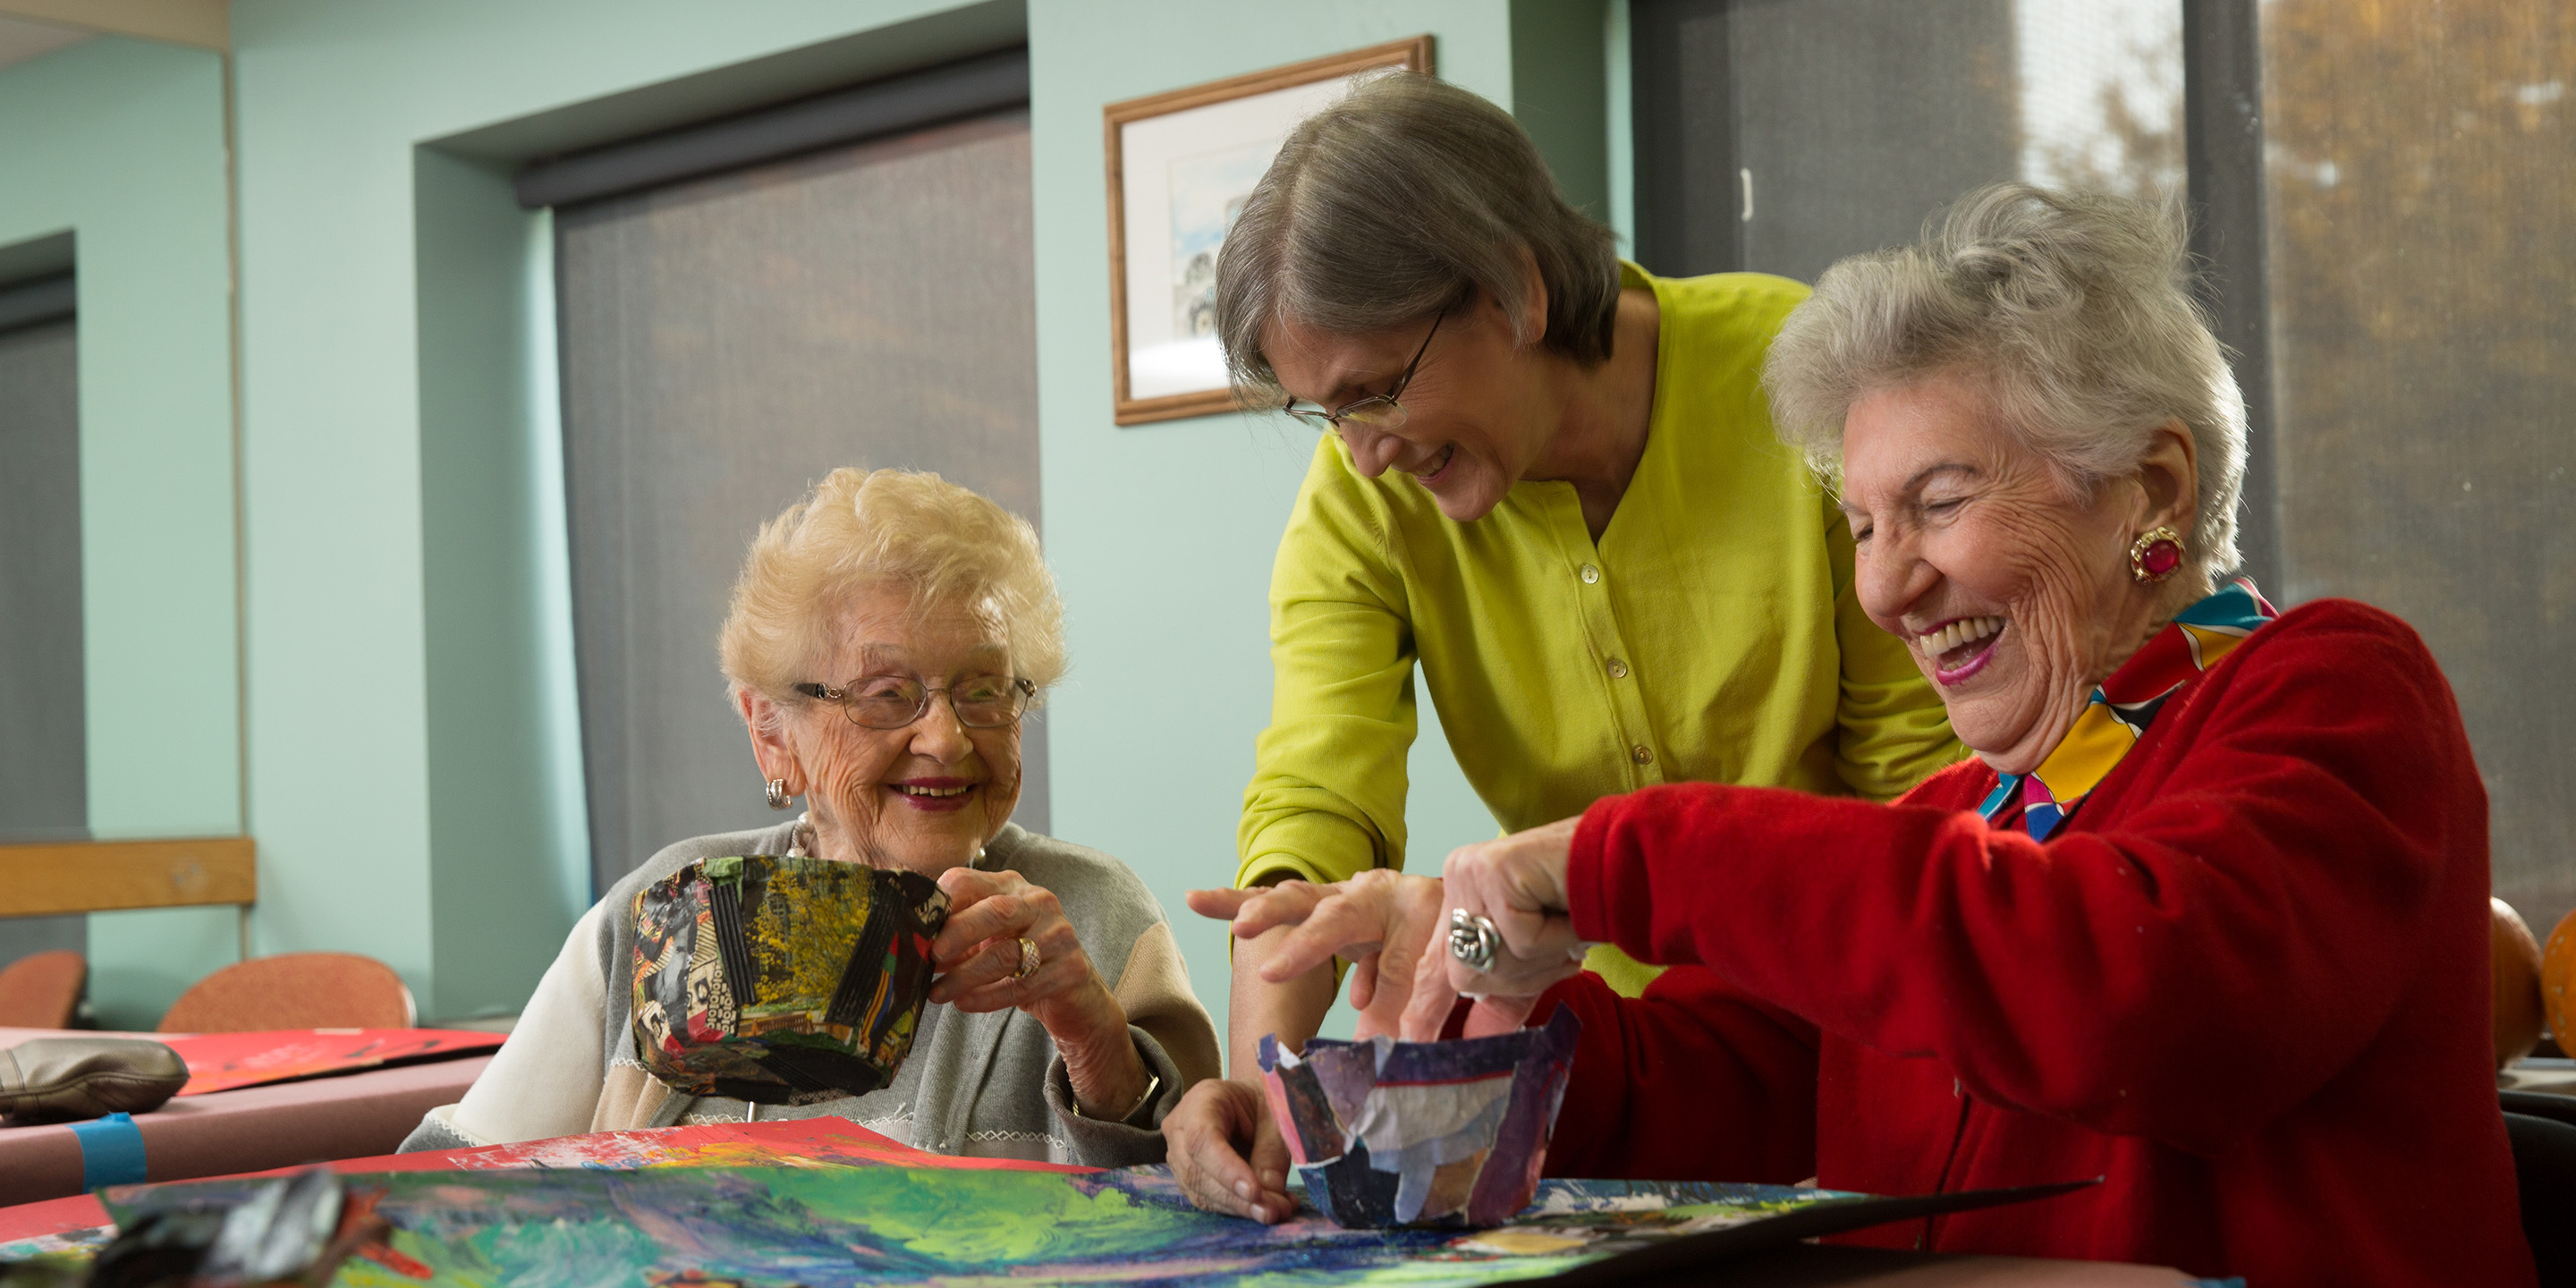 Art instructor showing two smiling women how to make colorful paper mache bowls